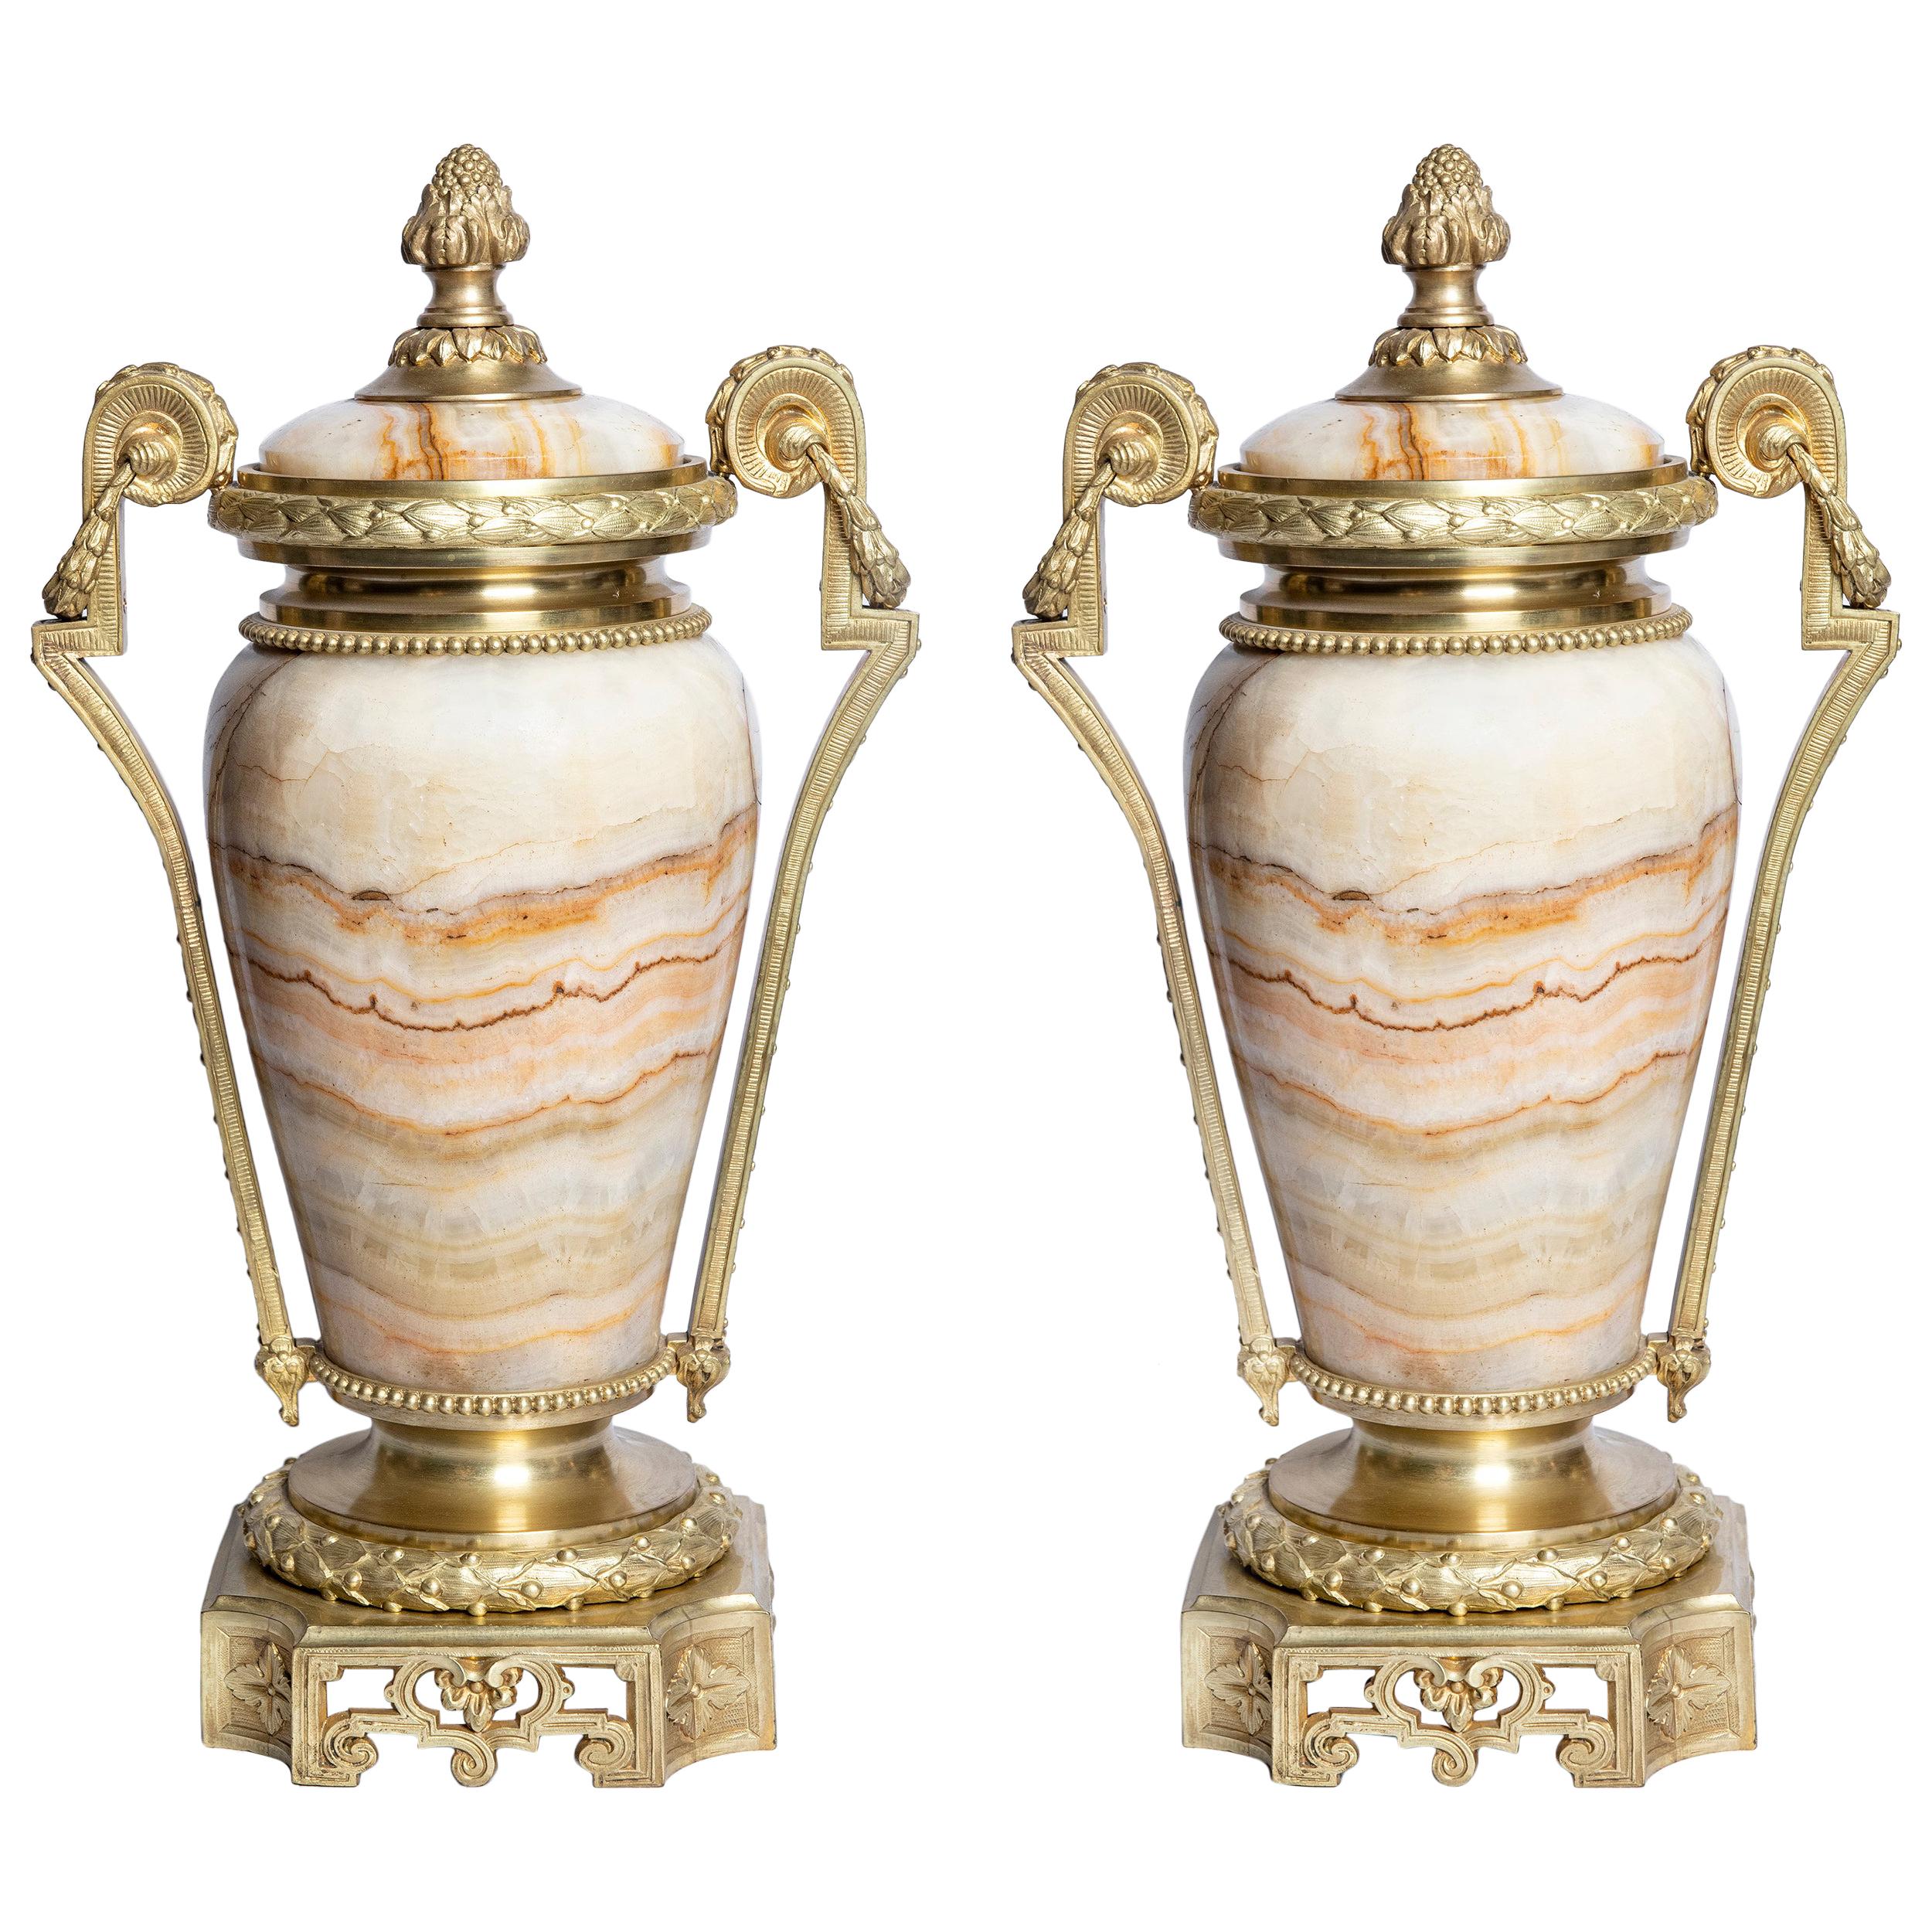 Pair of Gilt Bronze and Agate Cassolettes, France, Late 19th Century